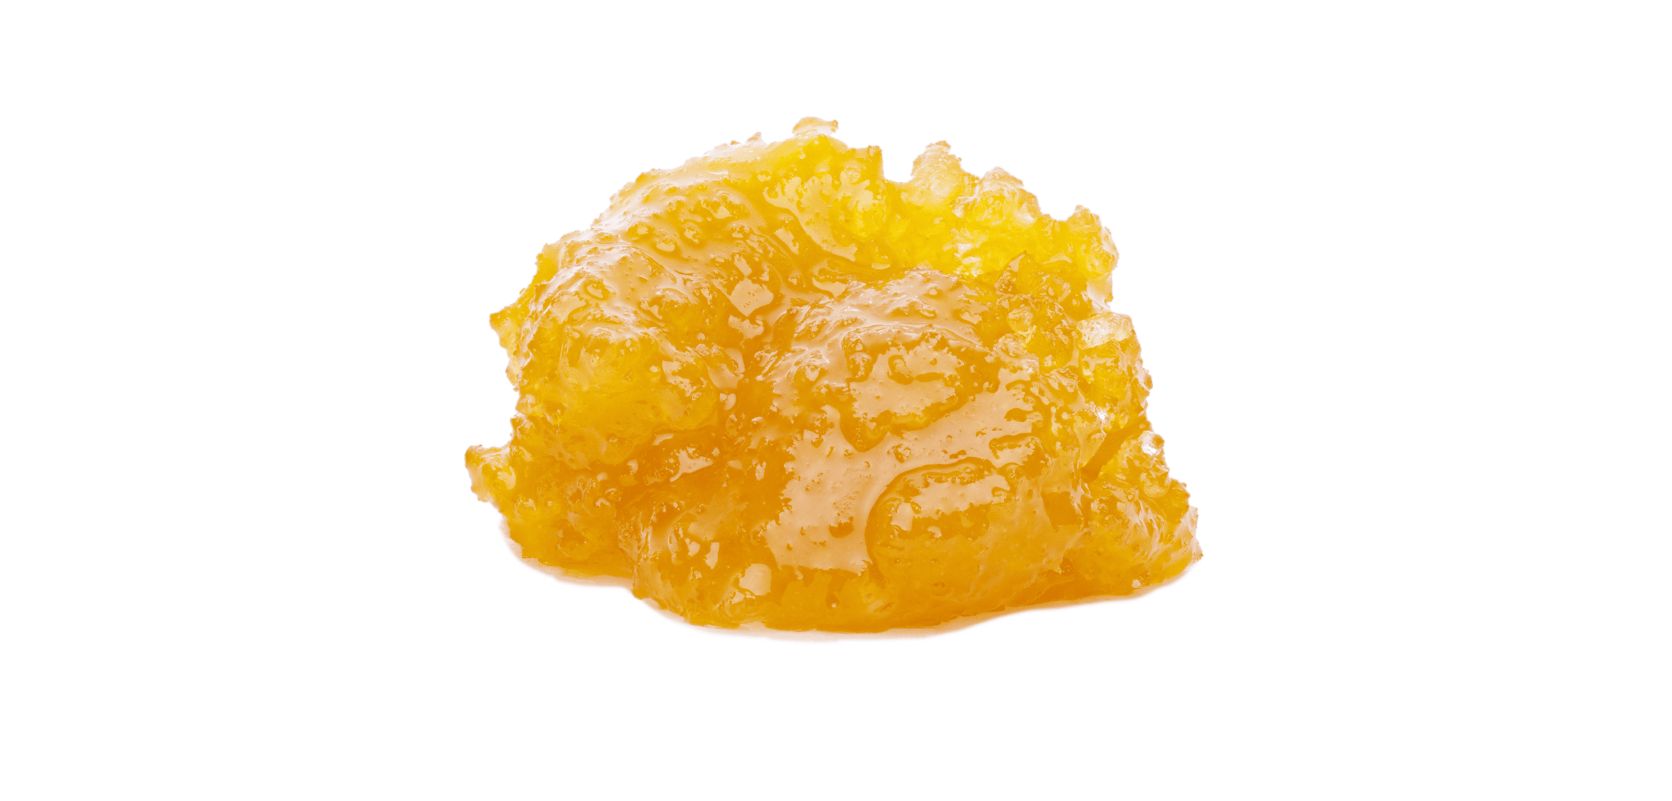 Live resin brings lots of good things and can be used for both feeling better and having fun. Let's check out why this special cannabis concentrate is so great!